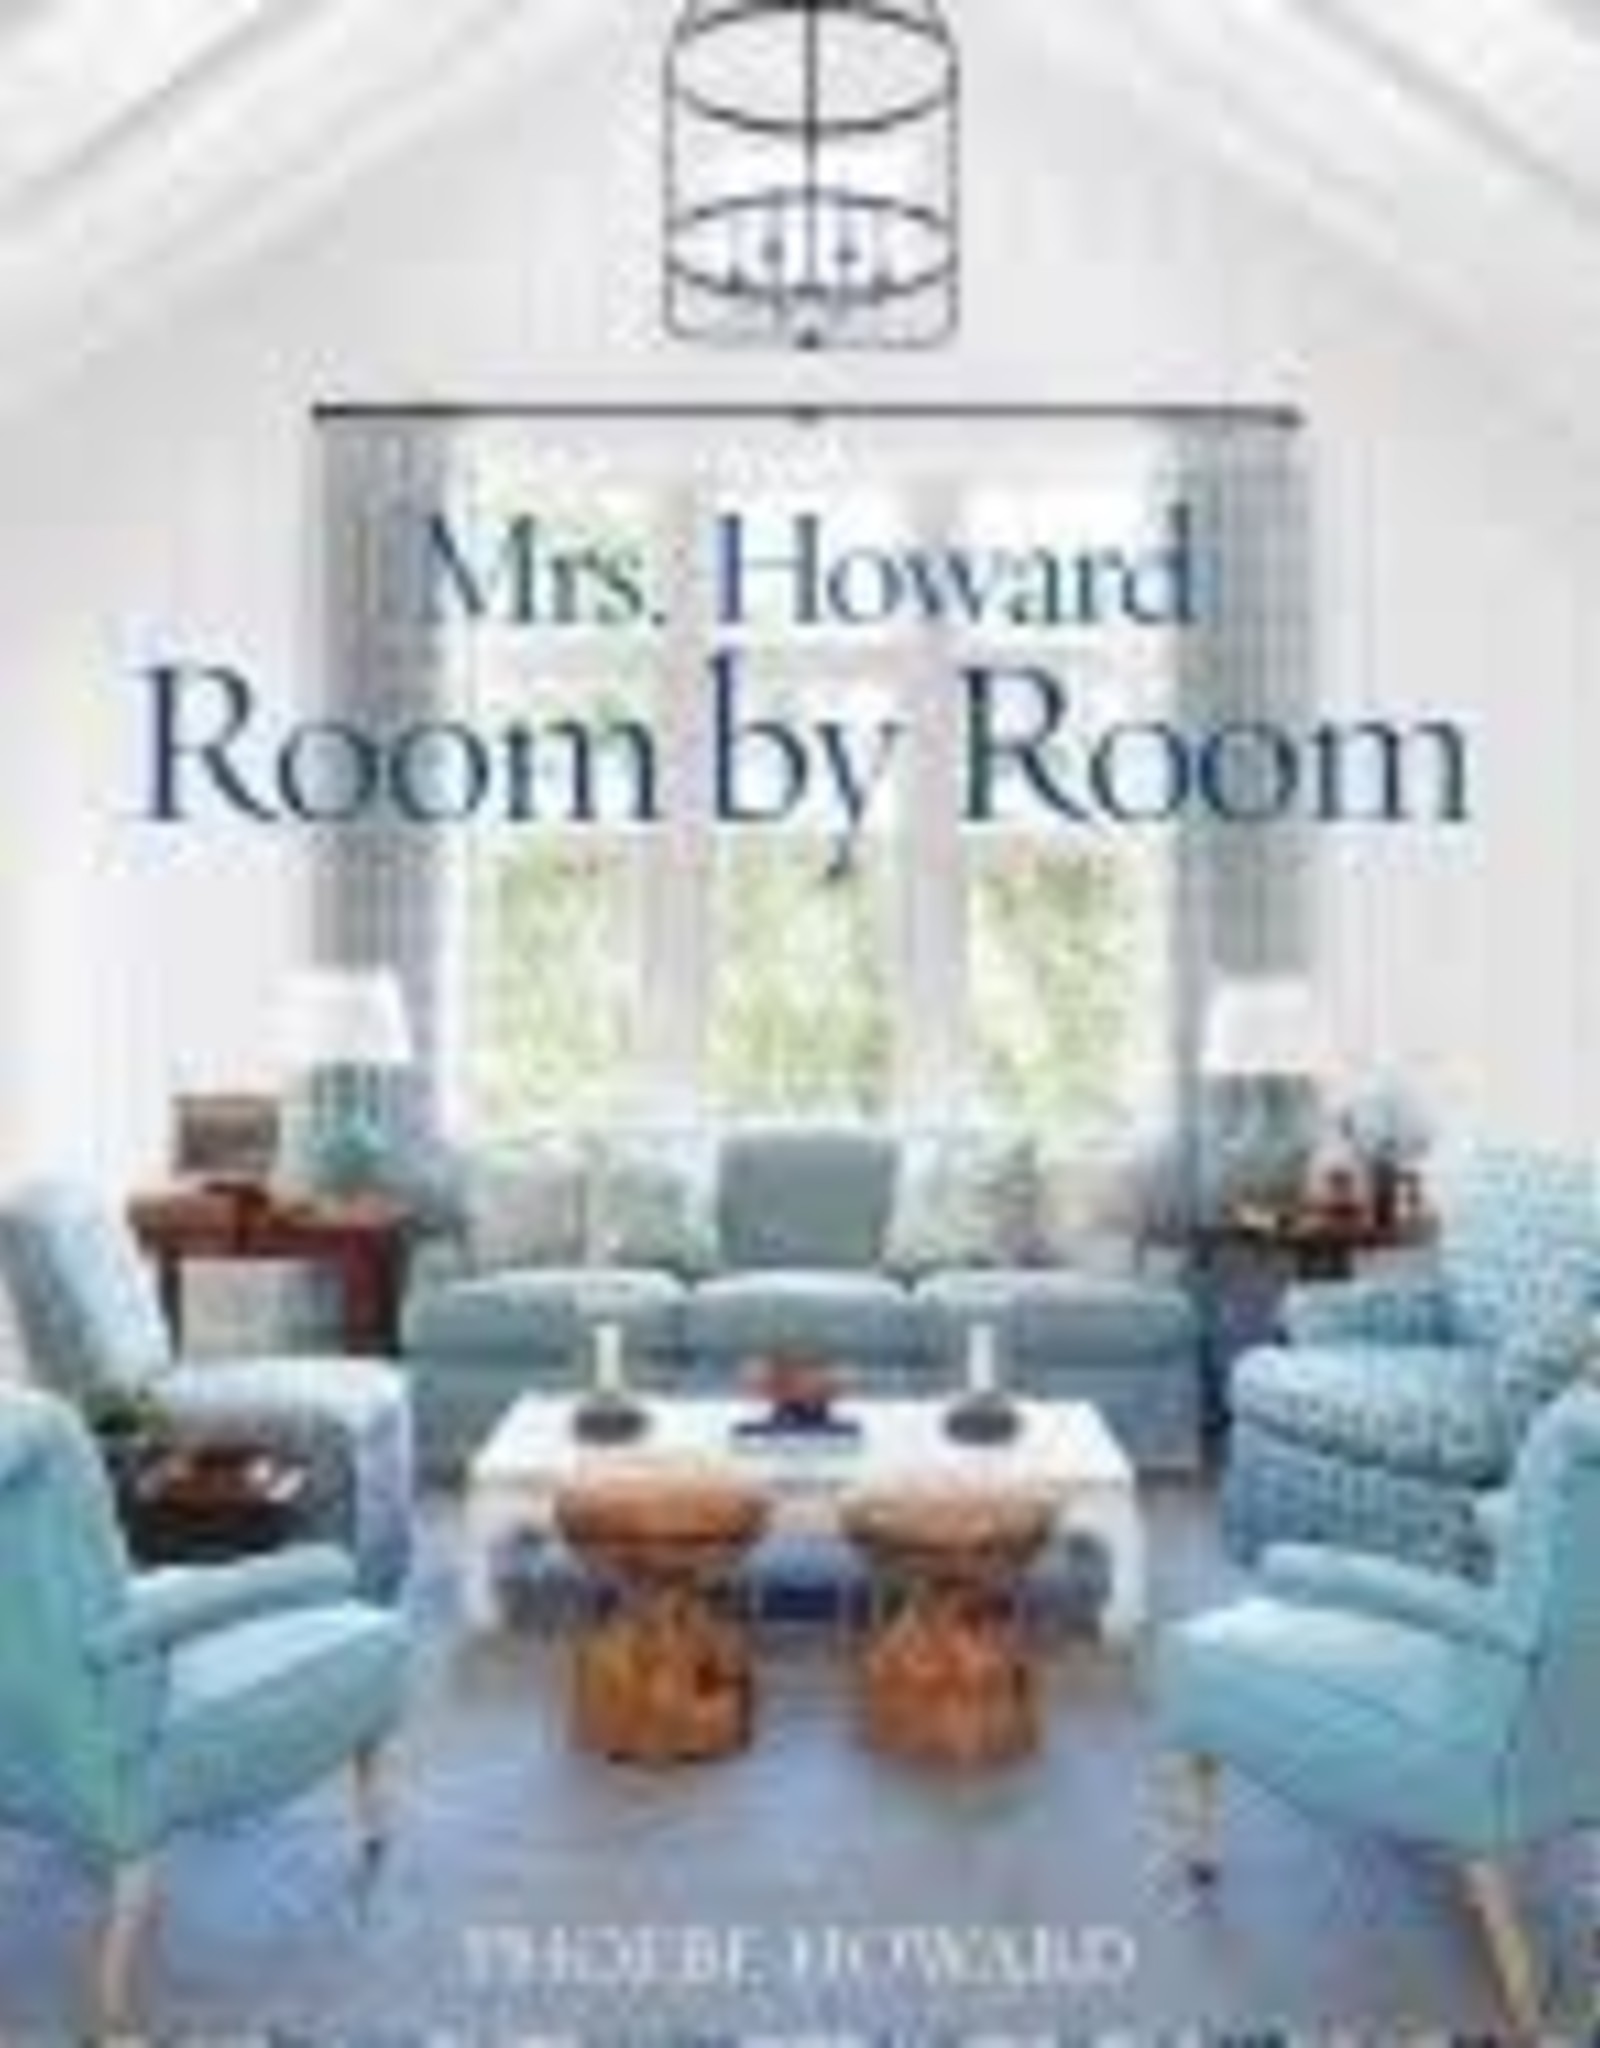 Gifts Mrs. Howard, Room by Room